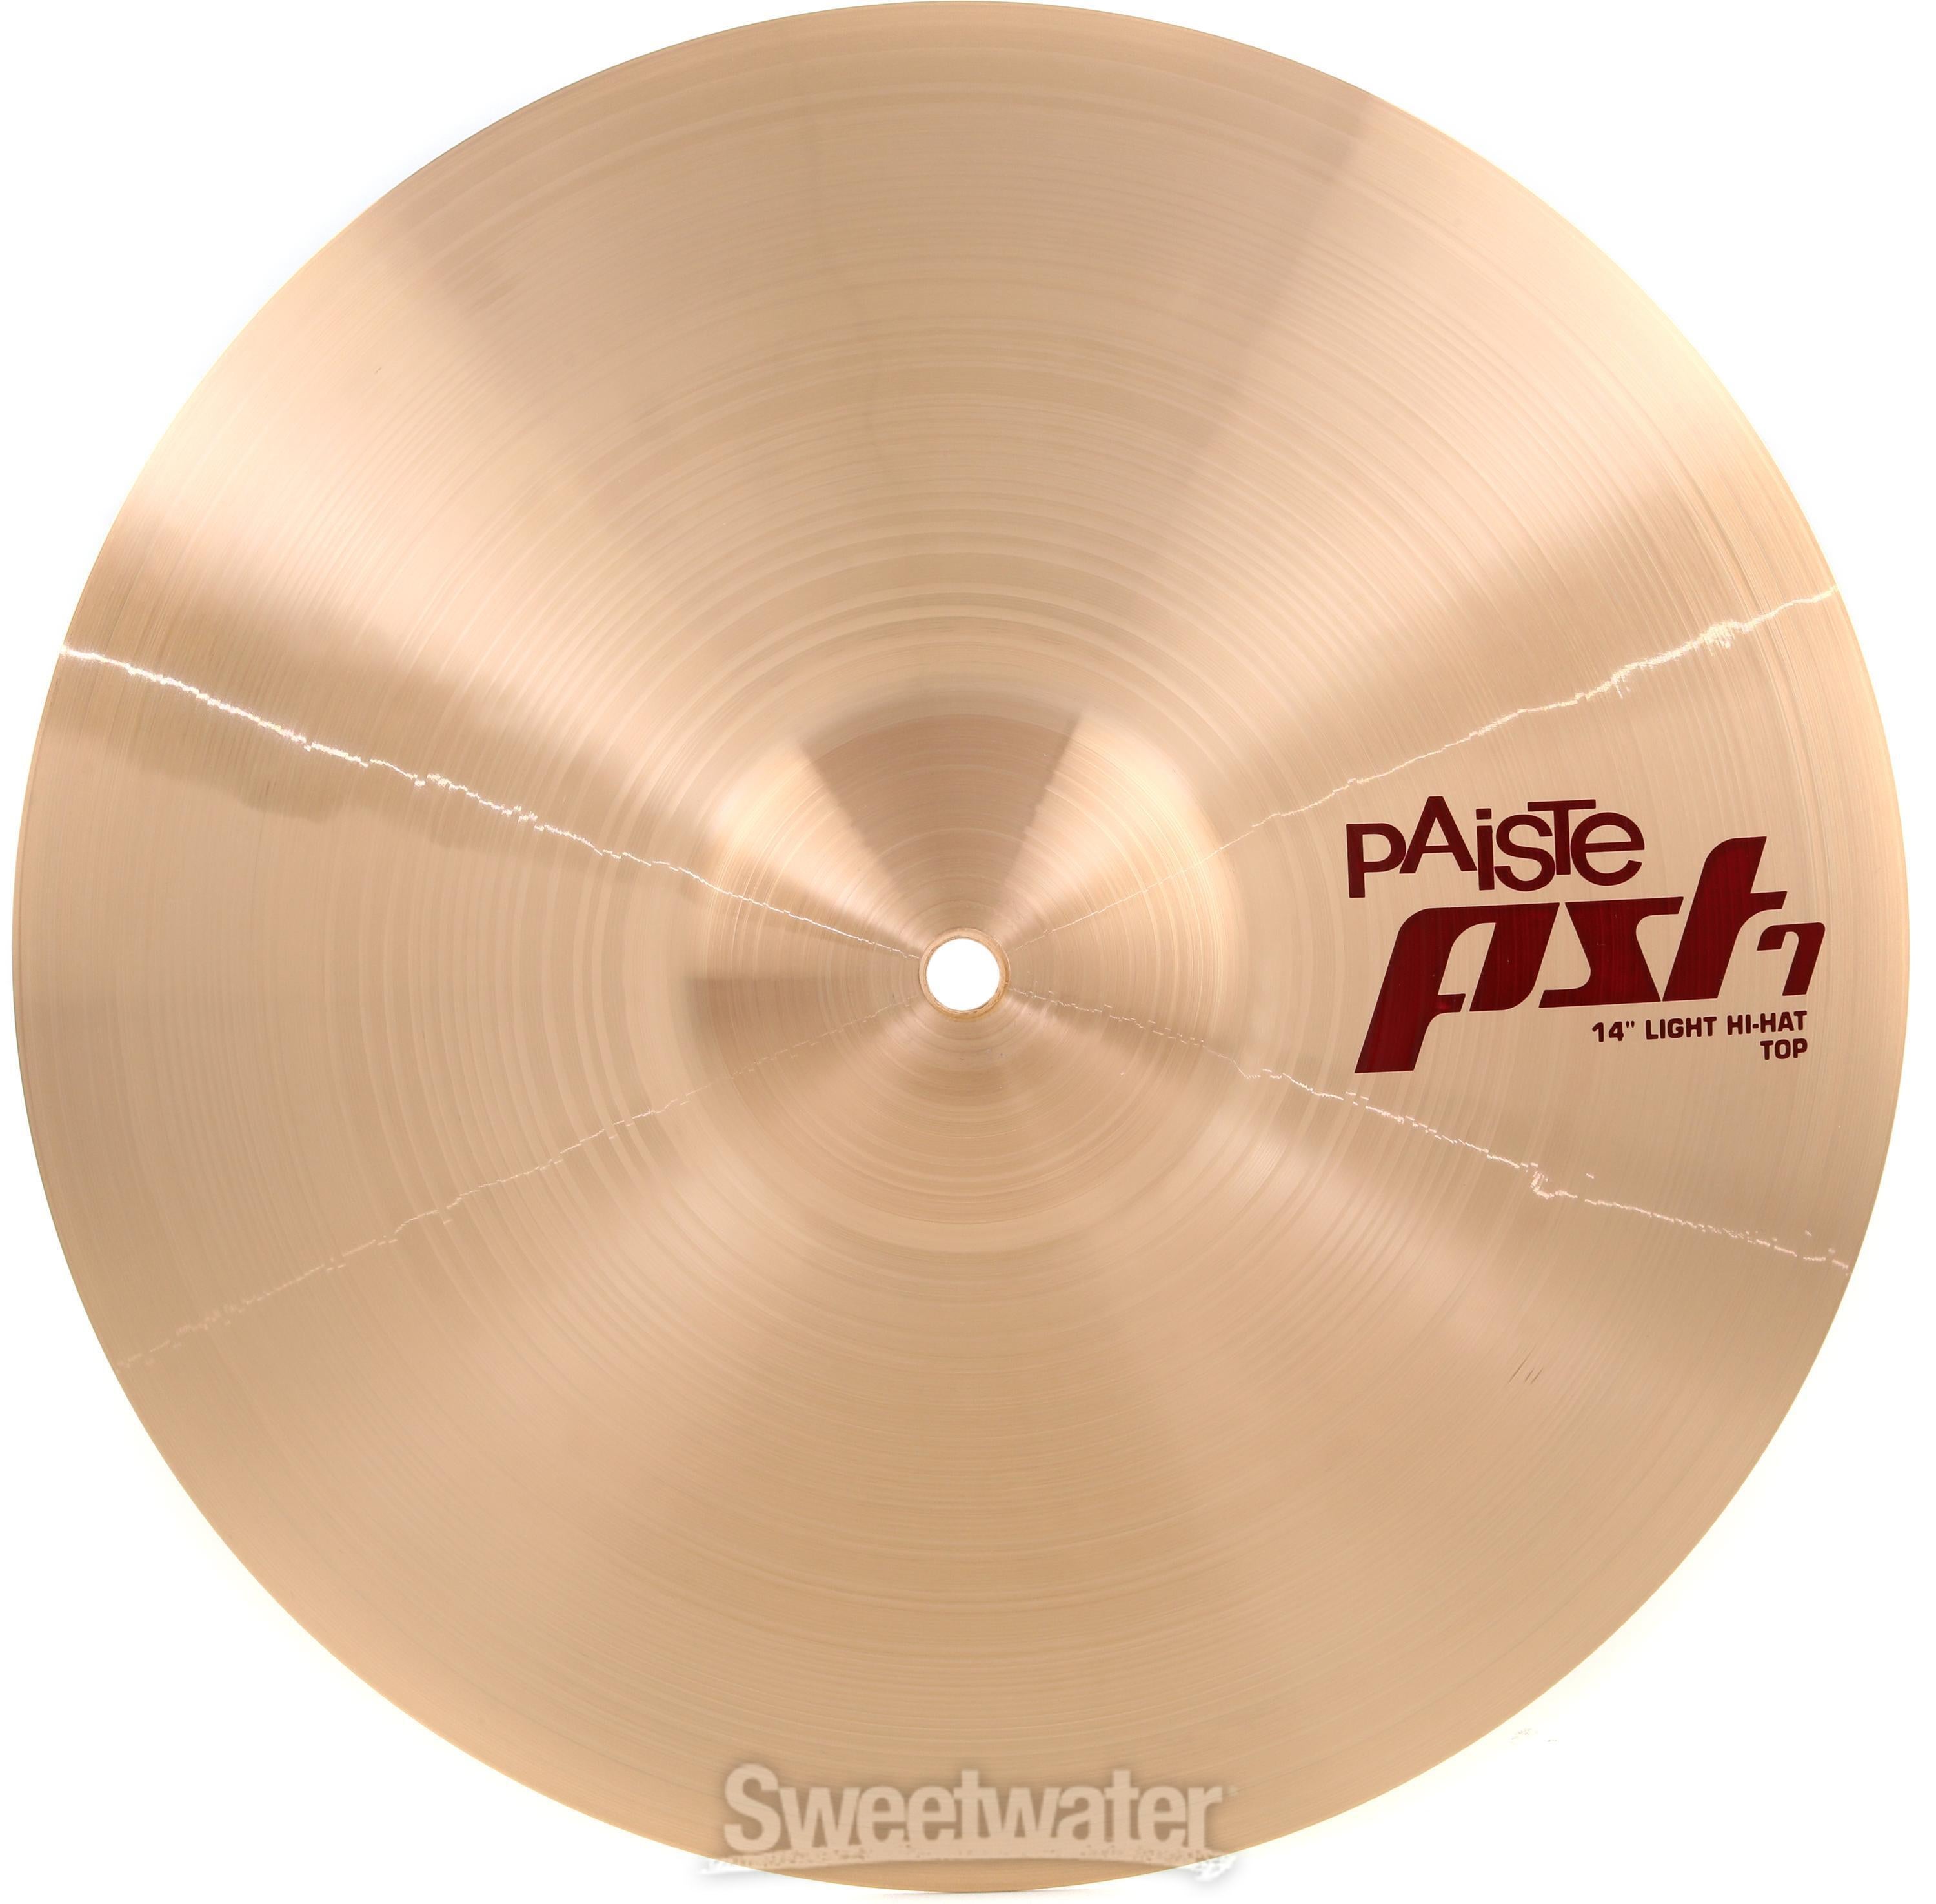 Paiste PST 7 Session Cymbal Set - 14/16/20 inch | Sweetwater